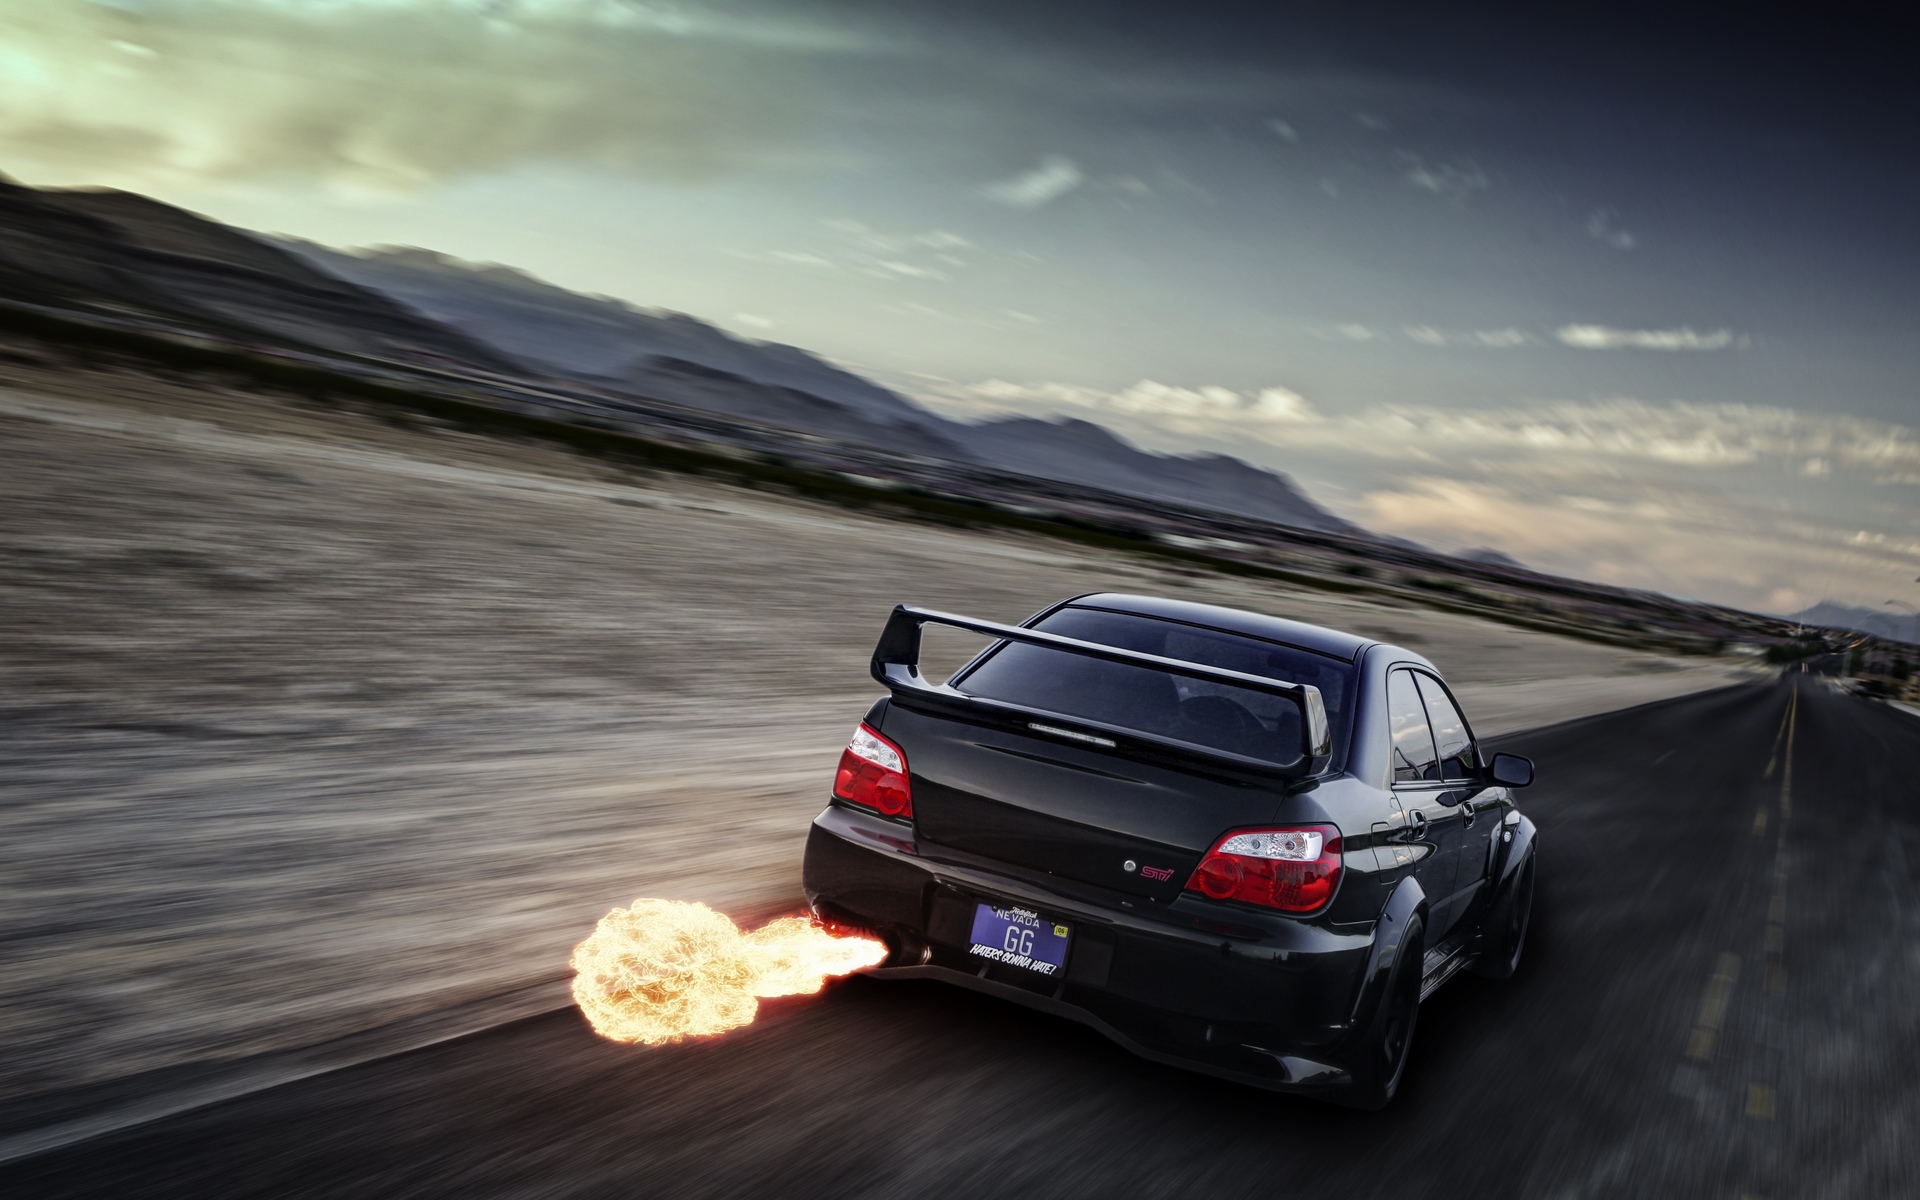 Flames Exhaust Explosion Roads Racing Landscapes Wallpaper Background